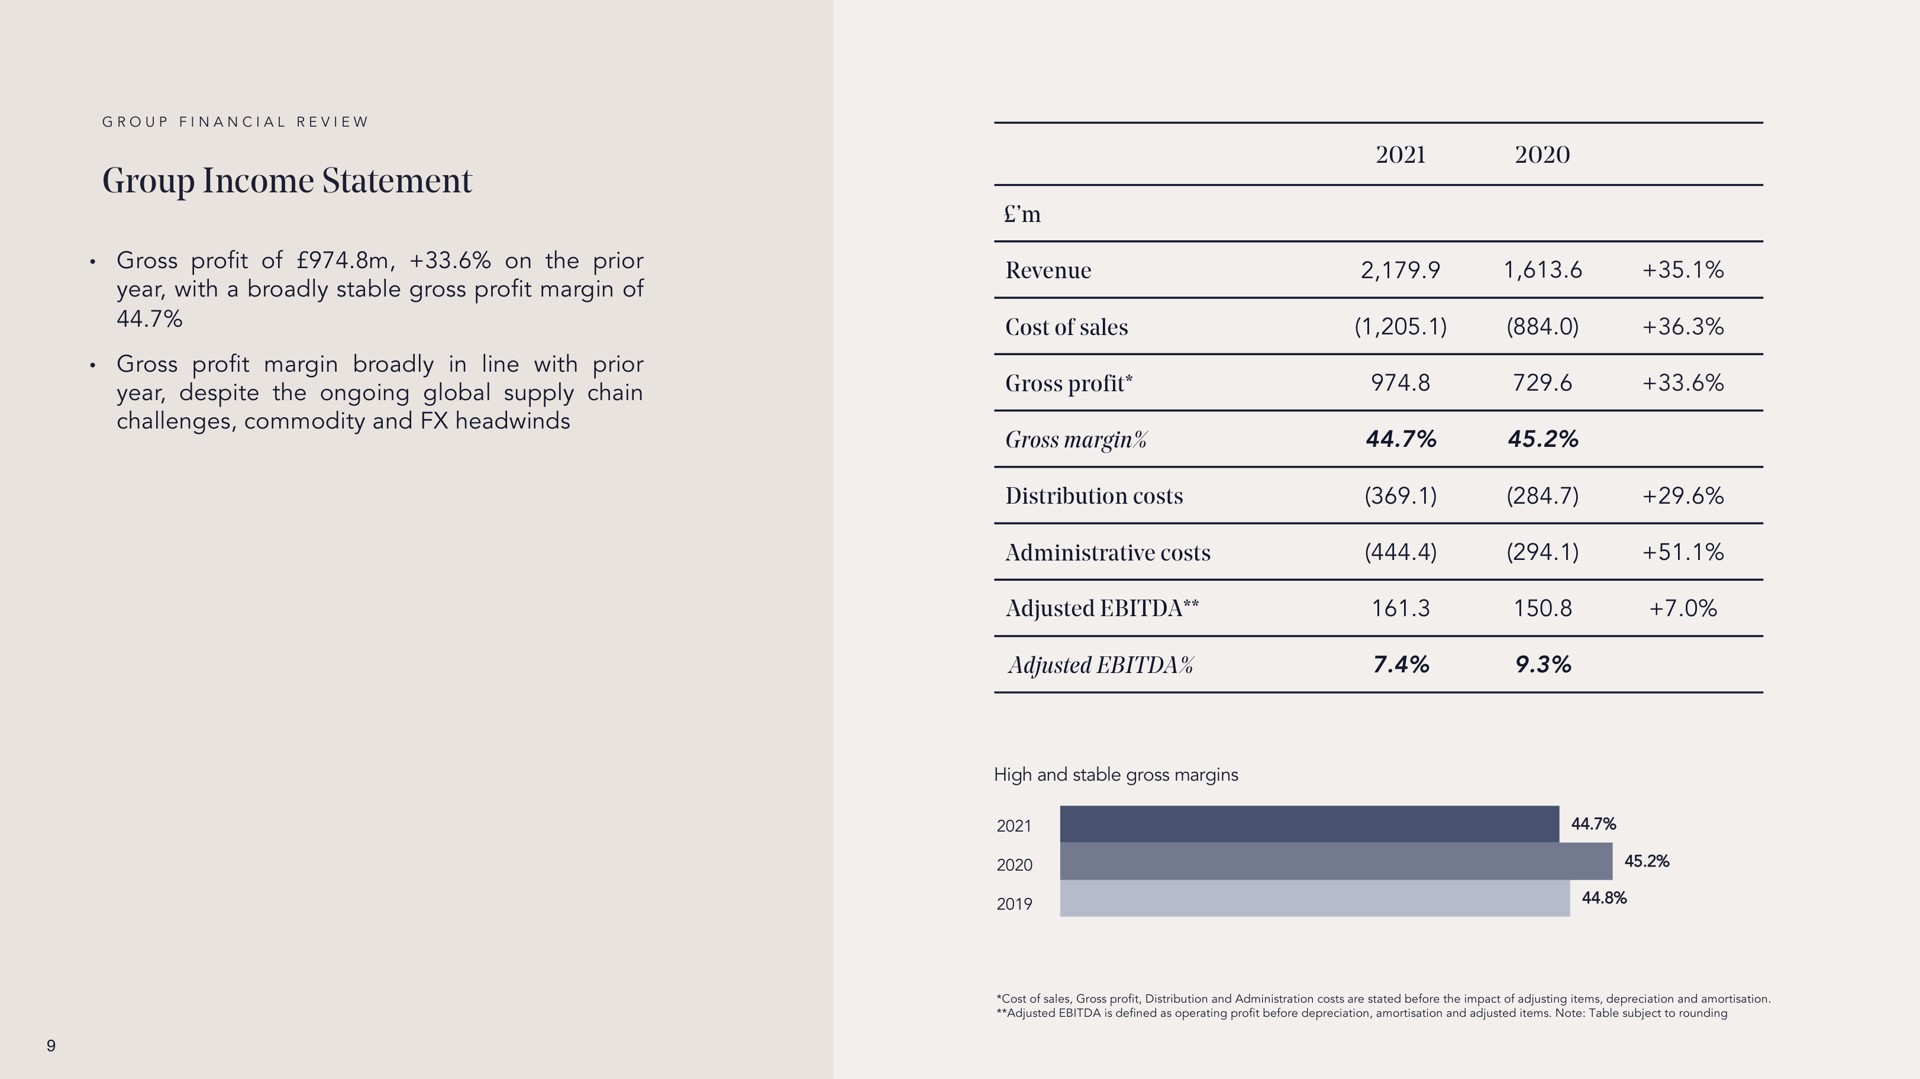 group income statement | The Hut Group